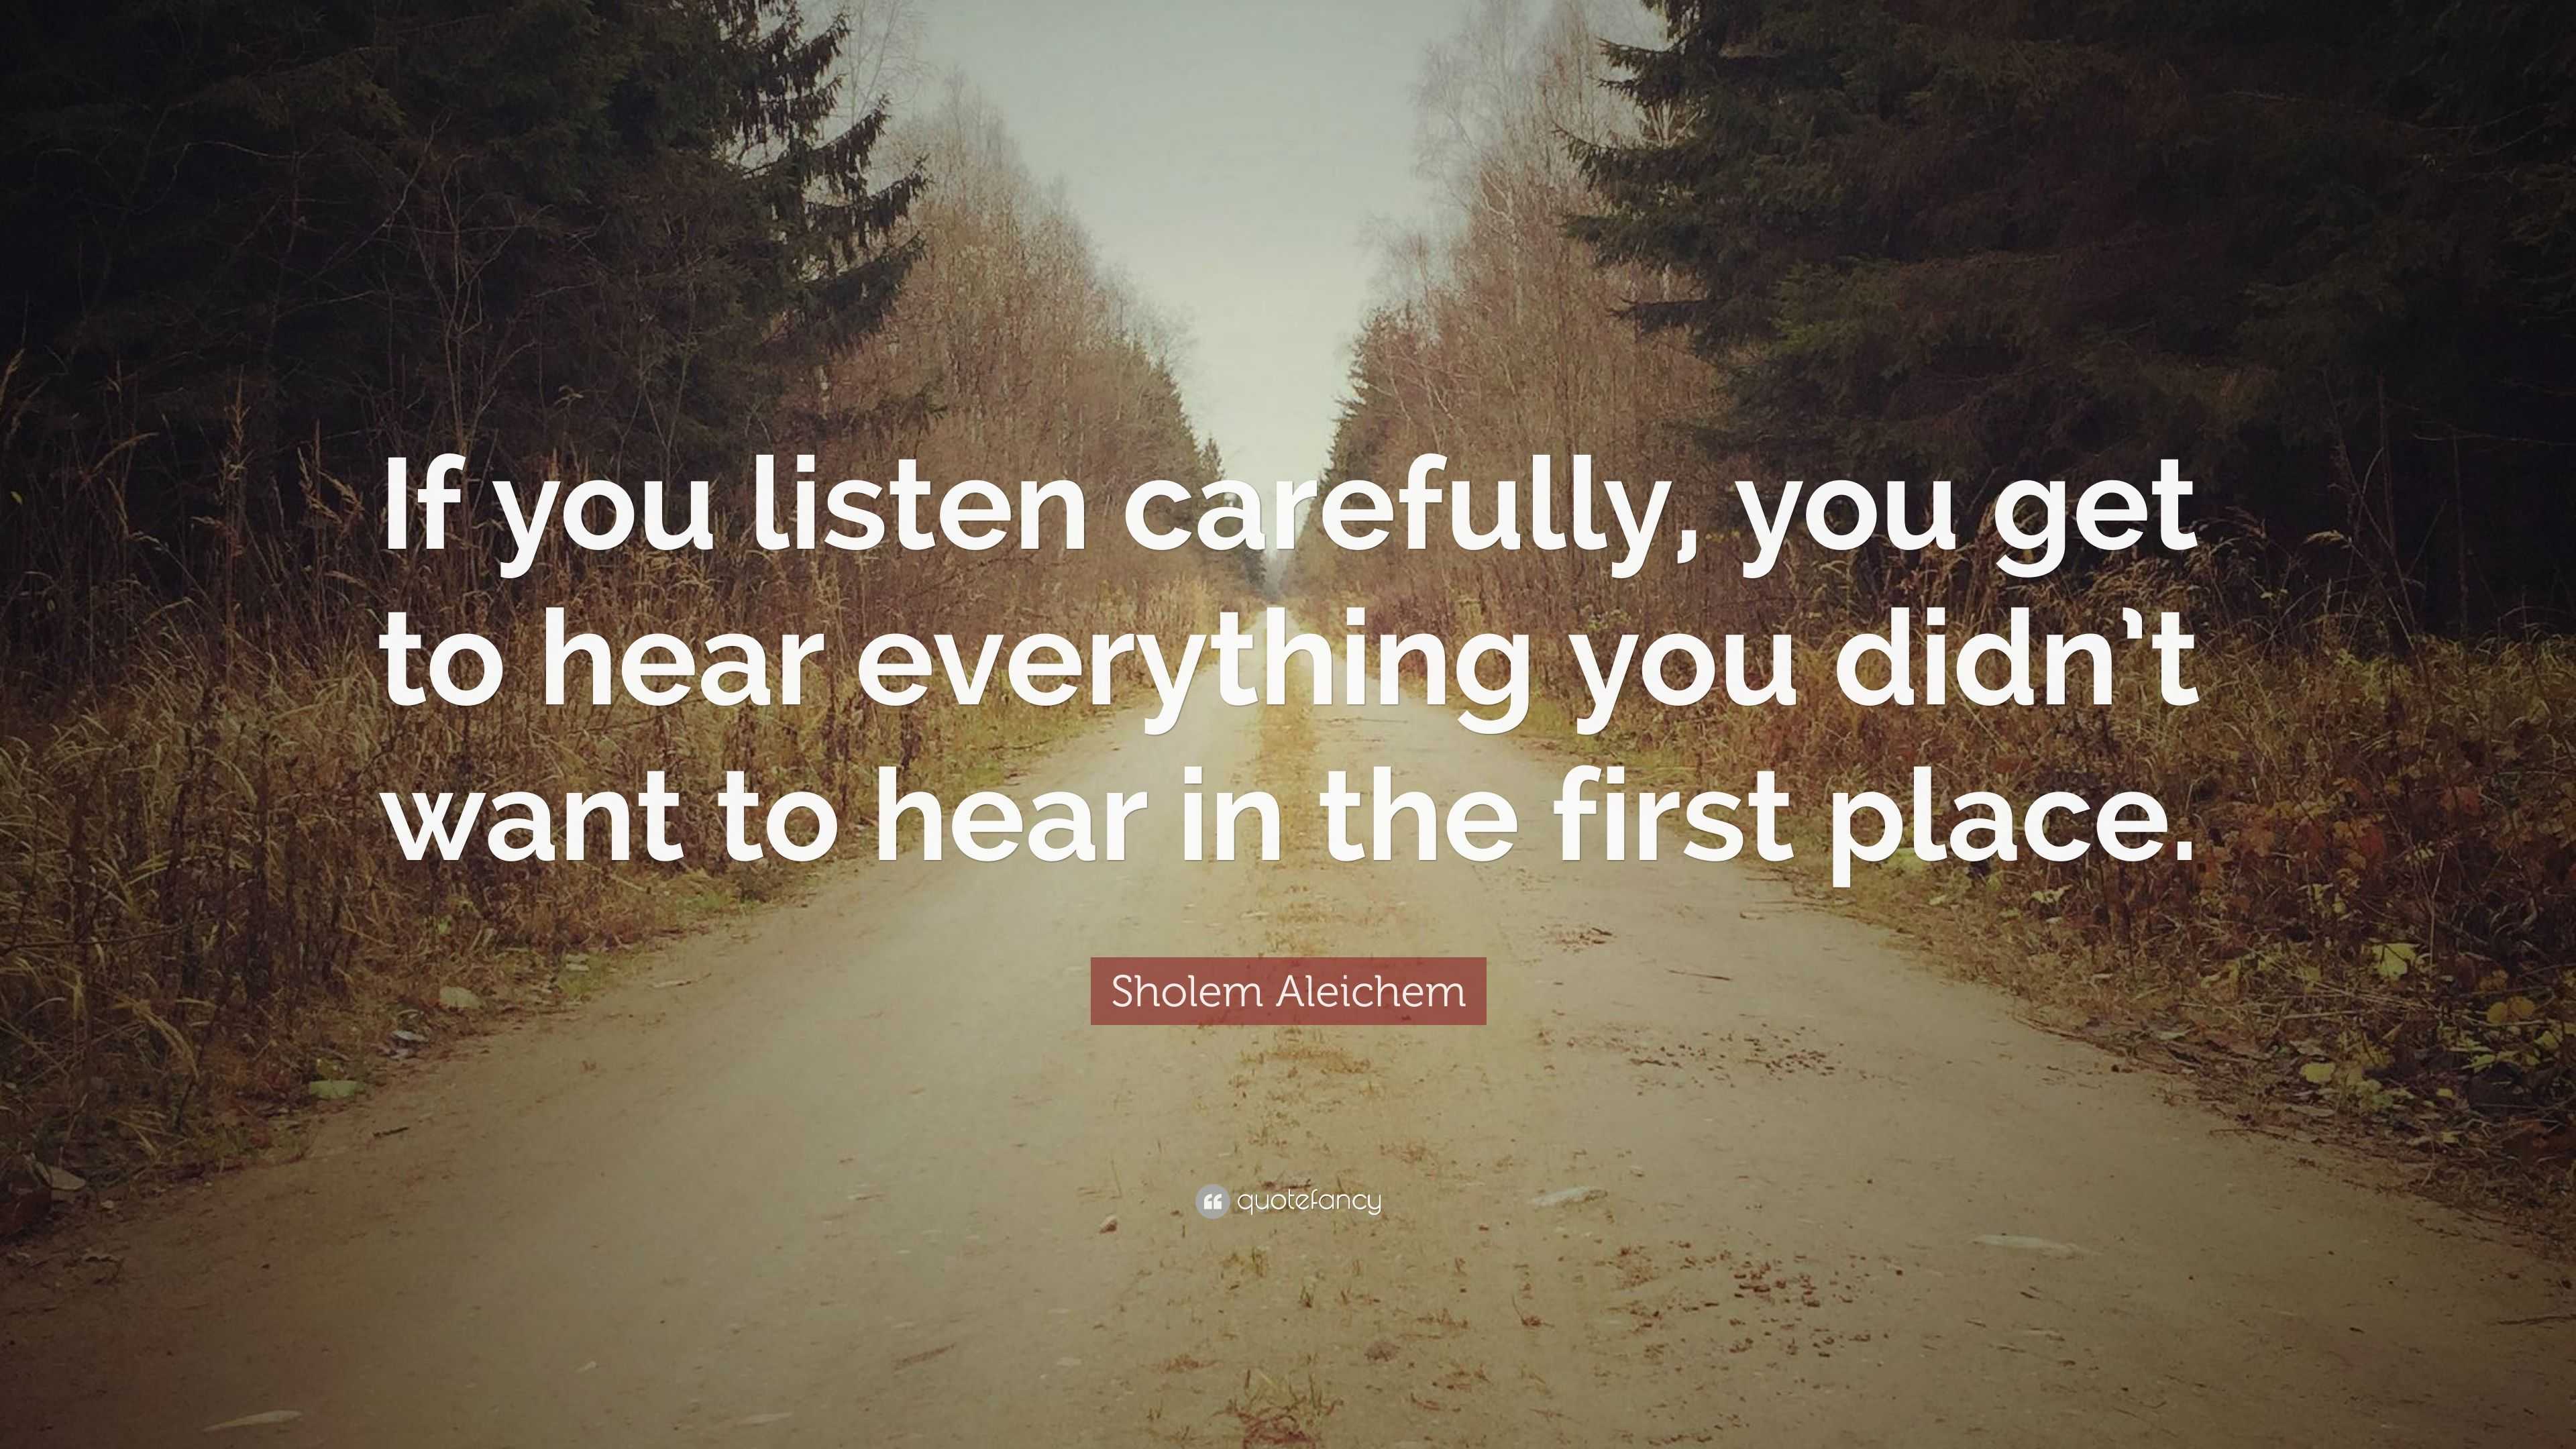 Sholem Aleichem Quote: “If you listen carefully, you get to hear ...